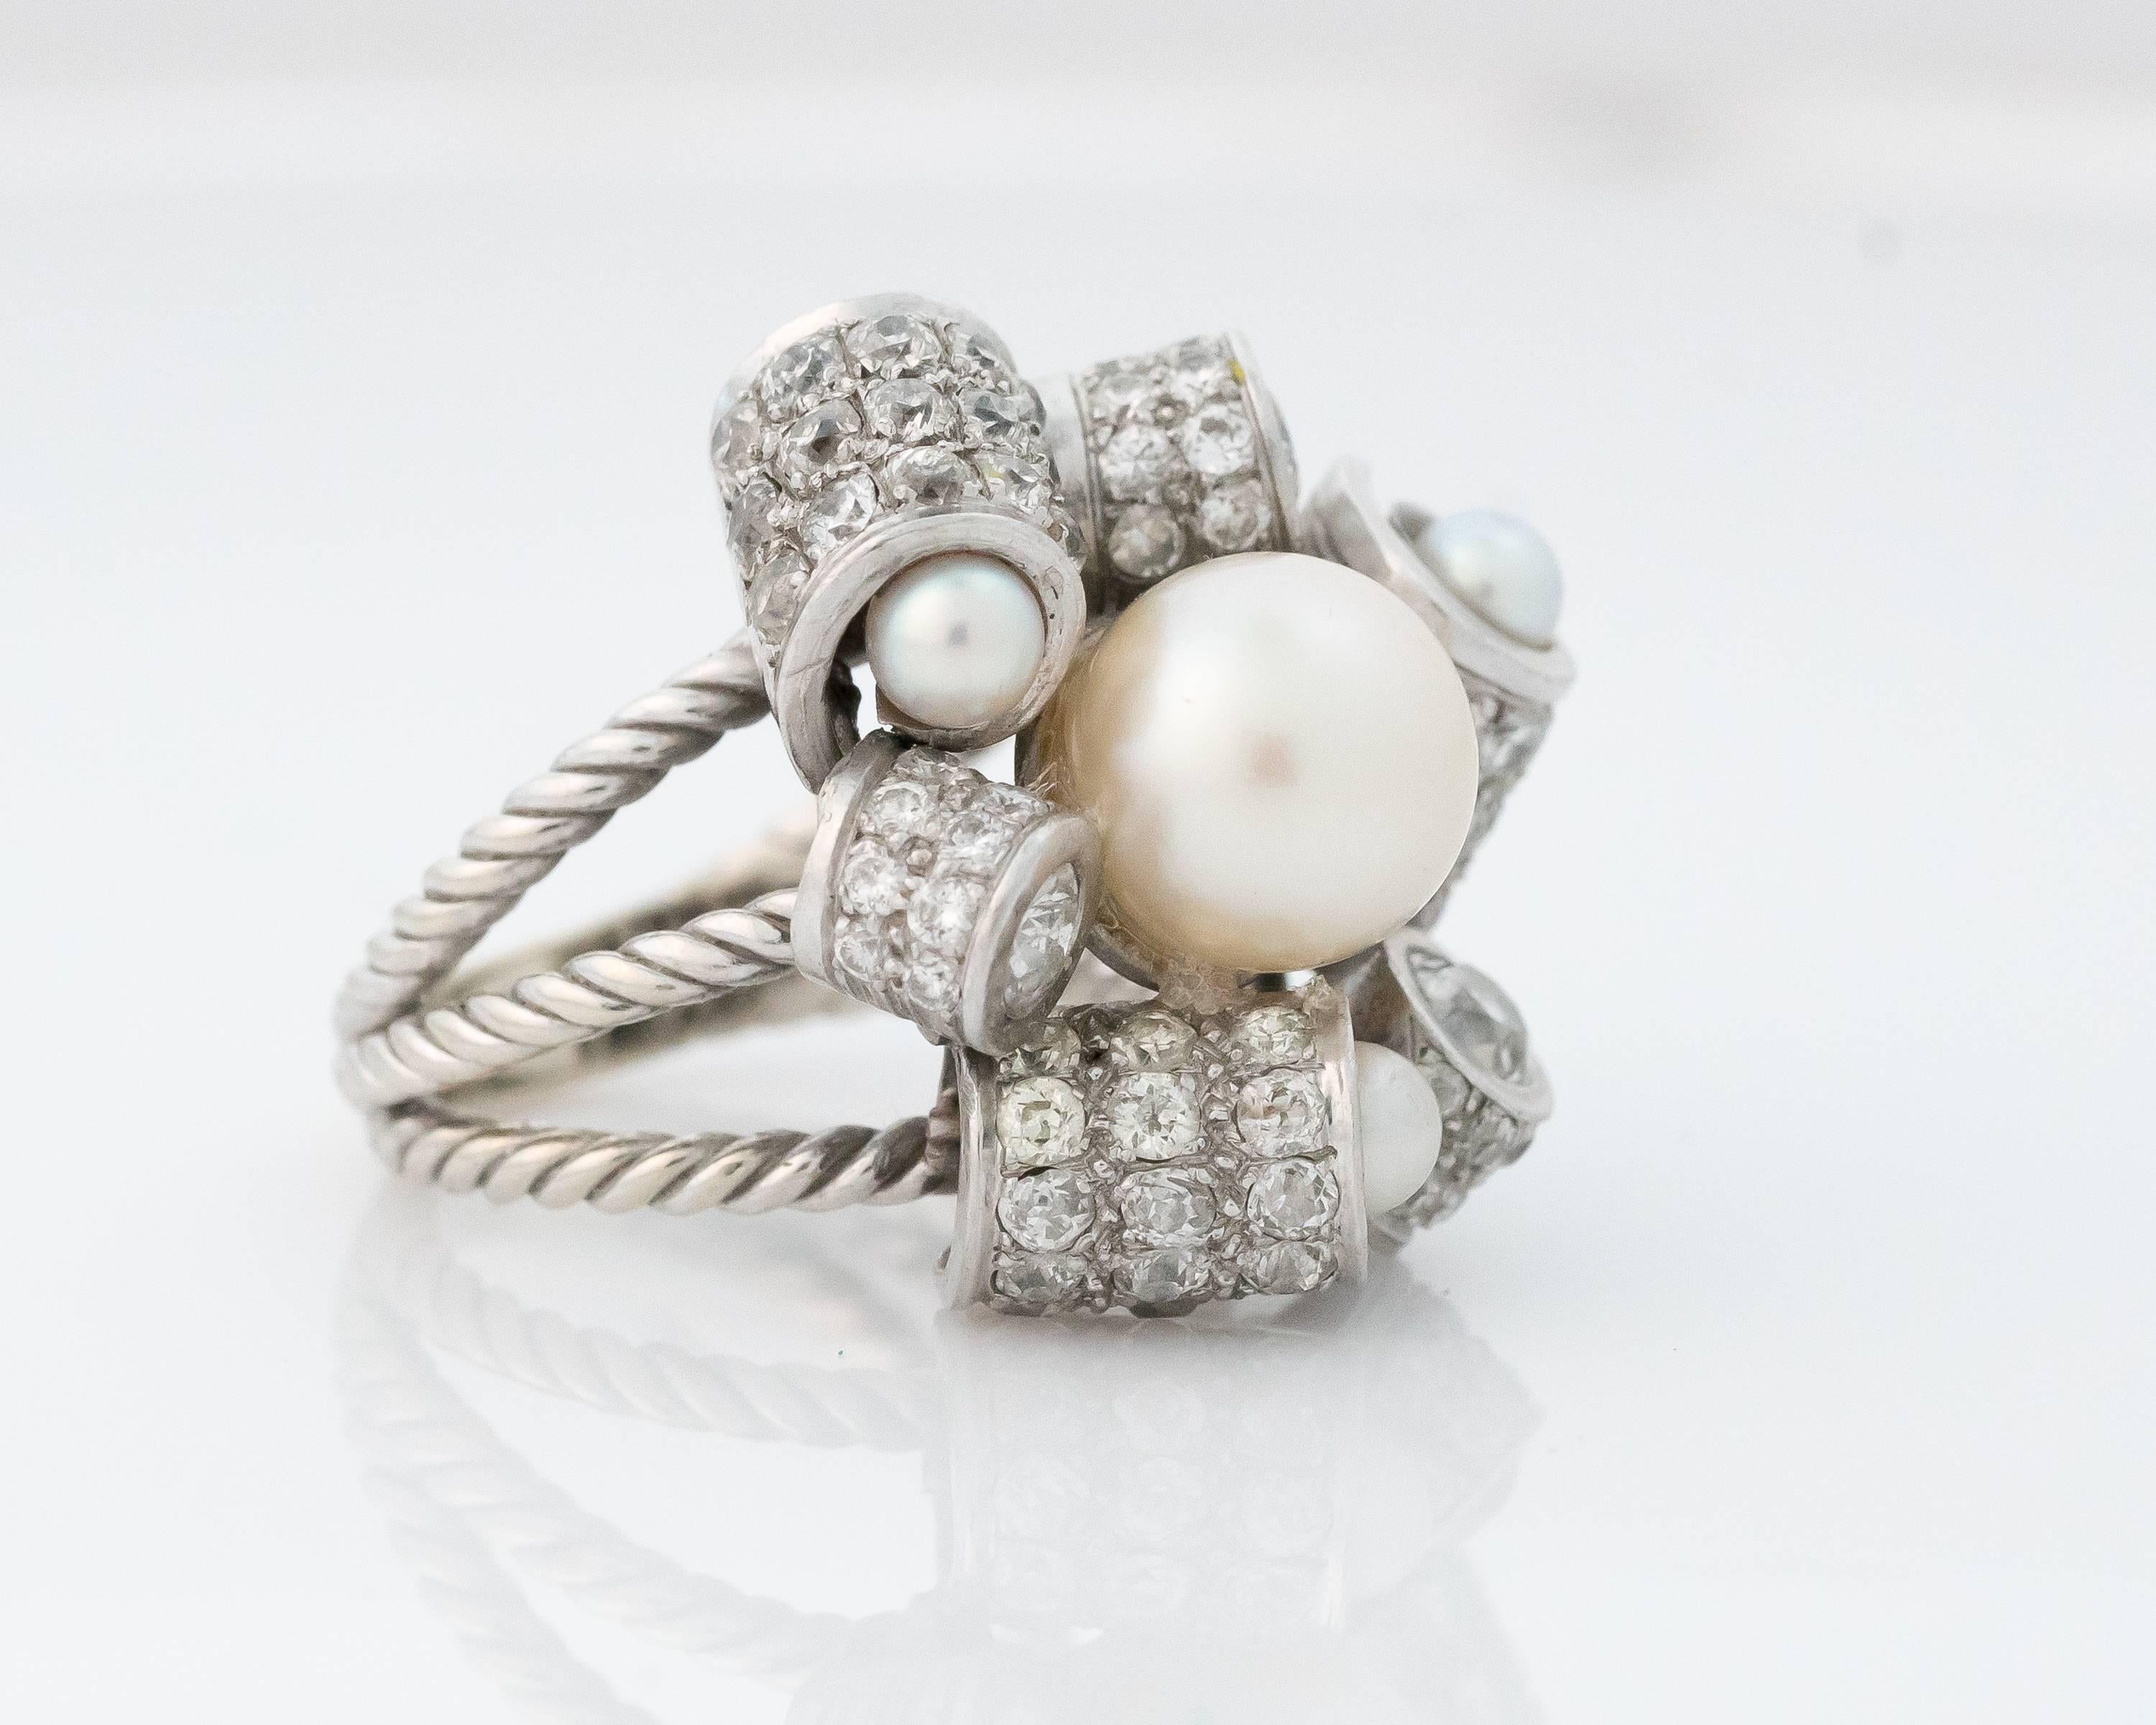 This gorgeous 1950s Pearl and Diamond Cluster Ring will make a statement wherever you wear it! 

The large 9.5 millimeter center white pearl is encircled by 6 diamond encrusted scroll motif cylinders. Each of the 3 larger cylinders is capped with a